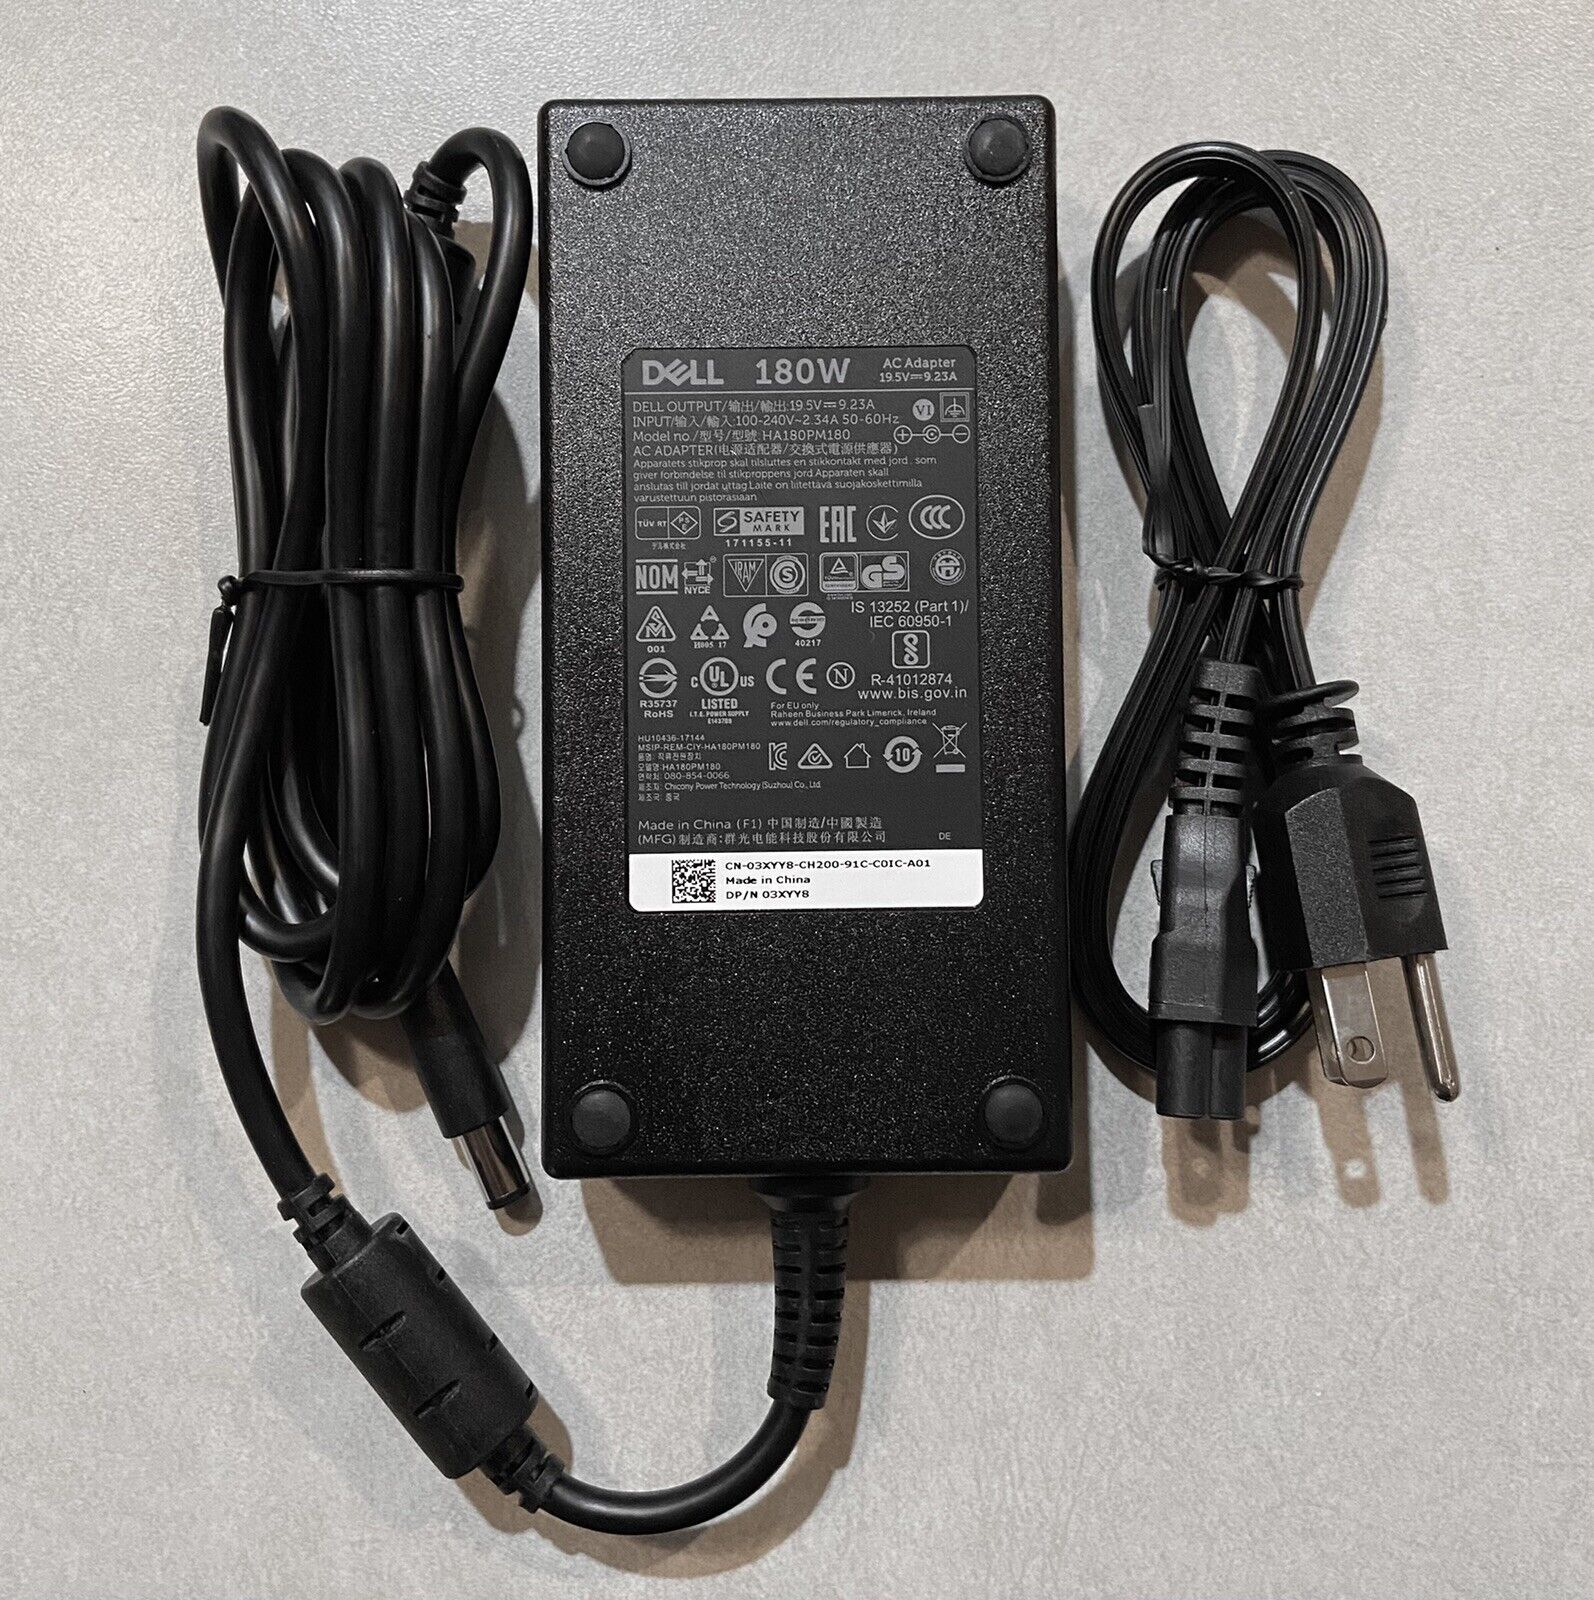 OEM Dell Standard 180W Power Adapter AC Laptop Power Supply Charger